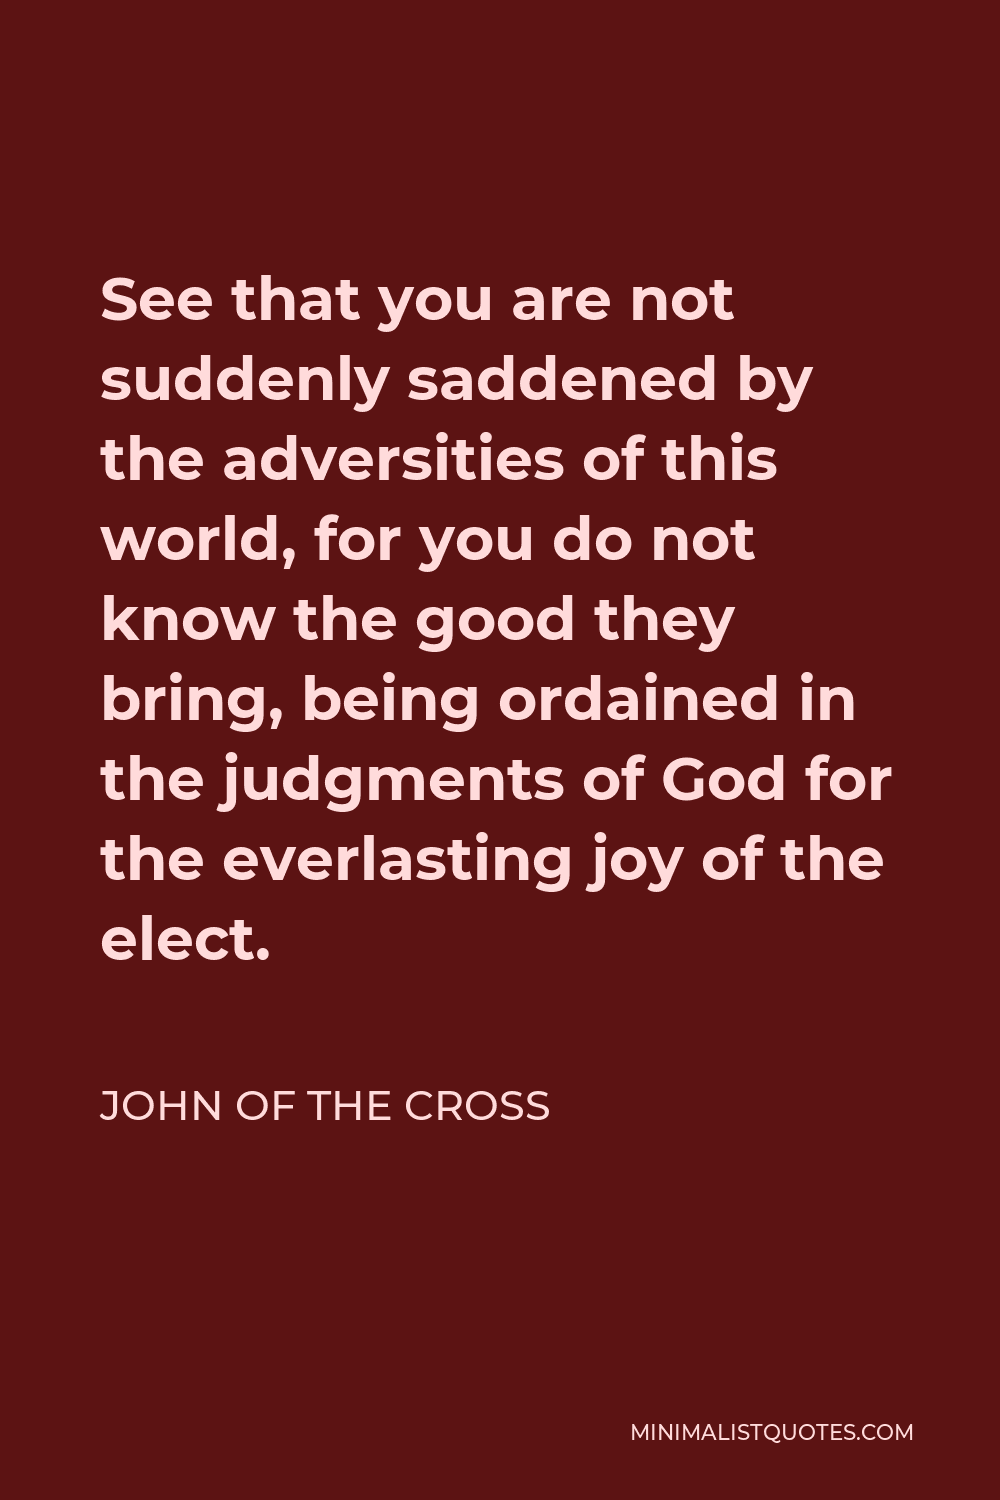 John of the Cross Quote - See that you are not suddenly saddened by the adversities of this world, for you do not know the good they bring, being ordained in the judgments of God for the everlasting joy of the elect.